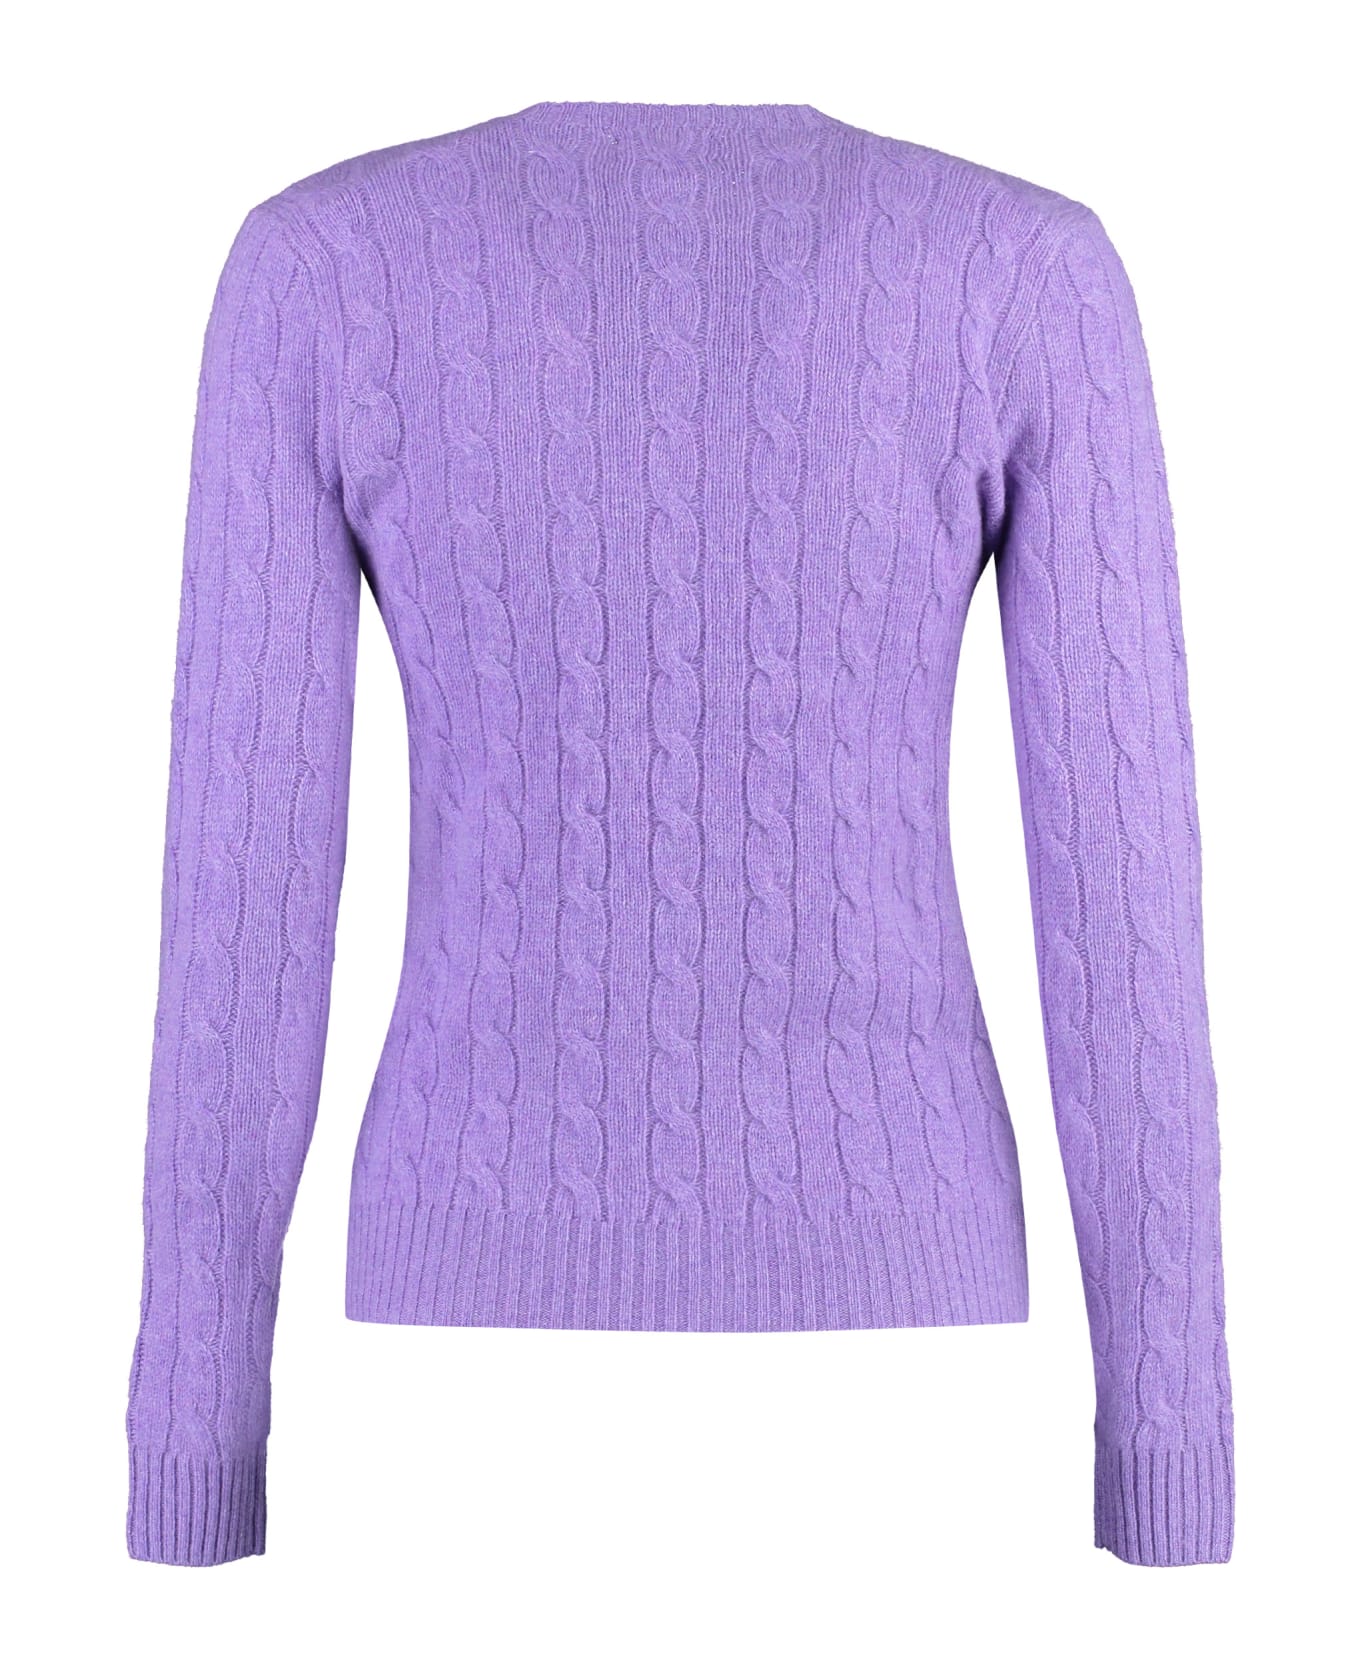 Polo Ralph Lauren Wool And Cashmere Blend Pullover - Purple ニットウェア